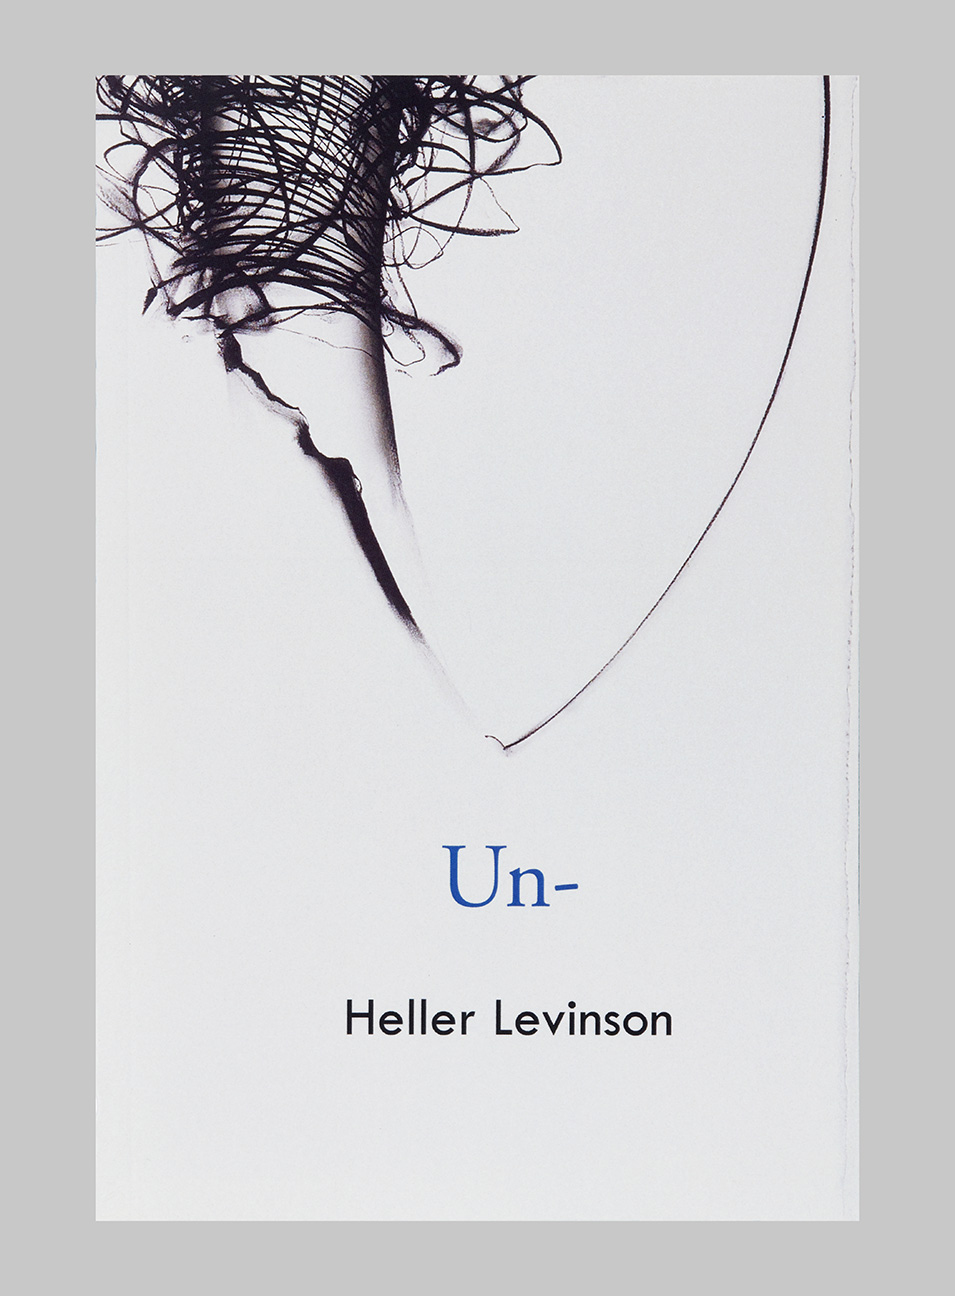 Un, Poems by Heller Levinson, cover art and design by Linda Lynch, 2019, Black Widow Press